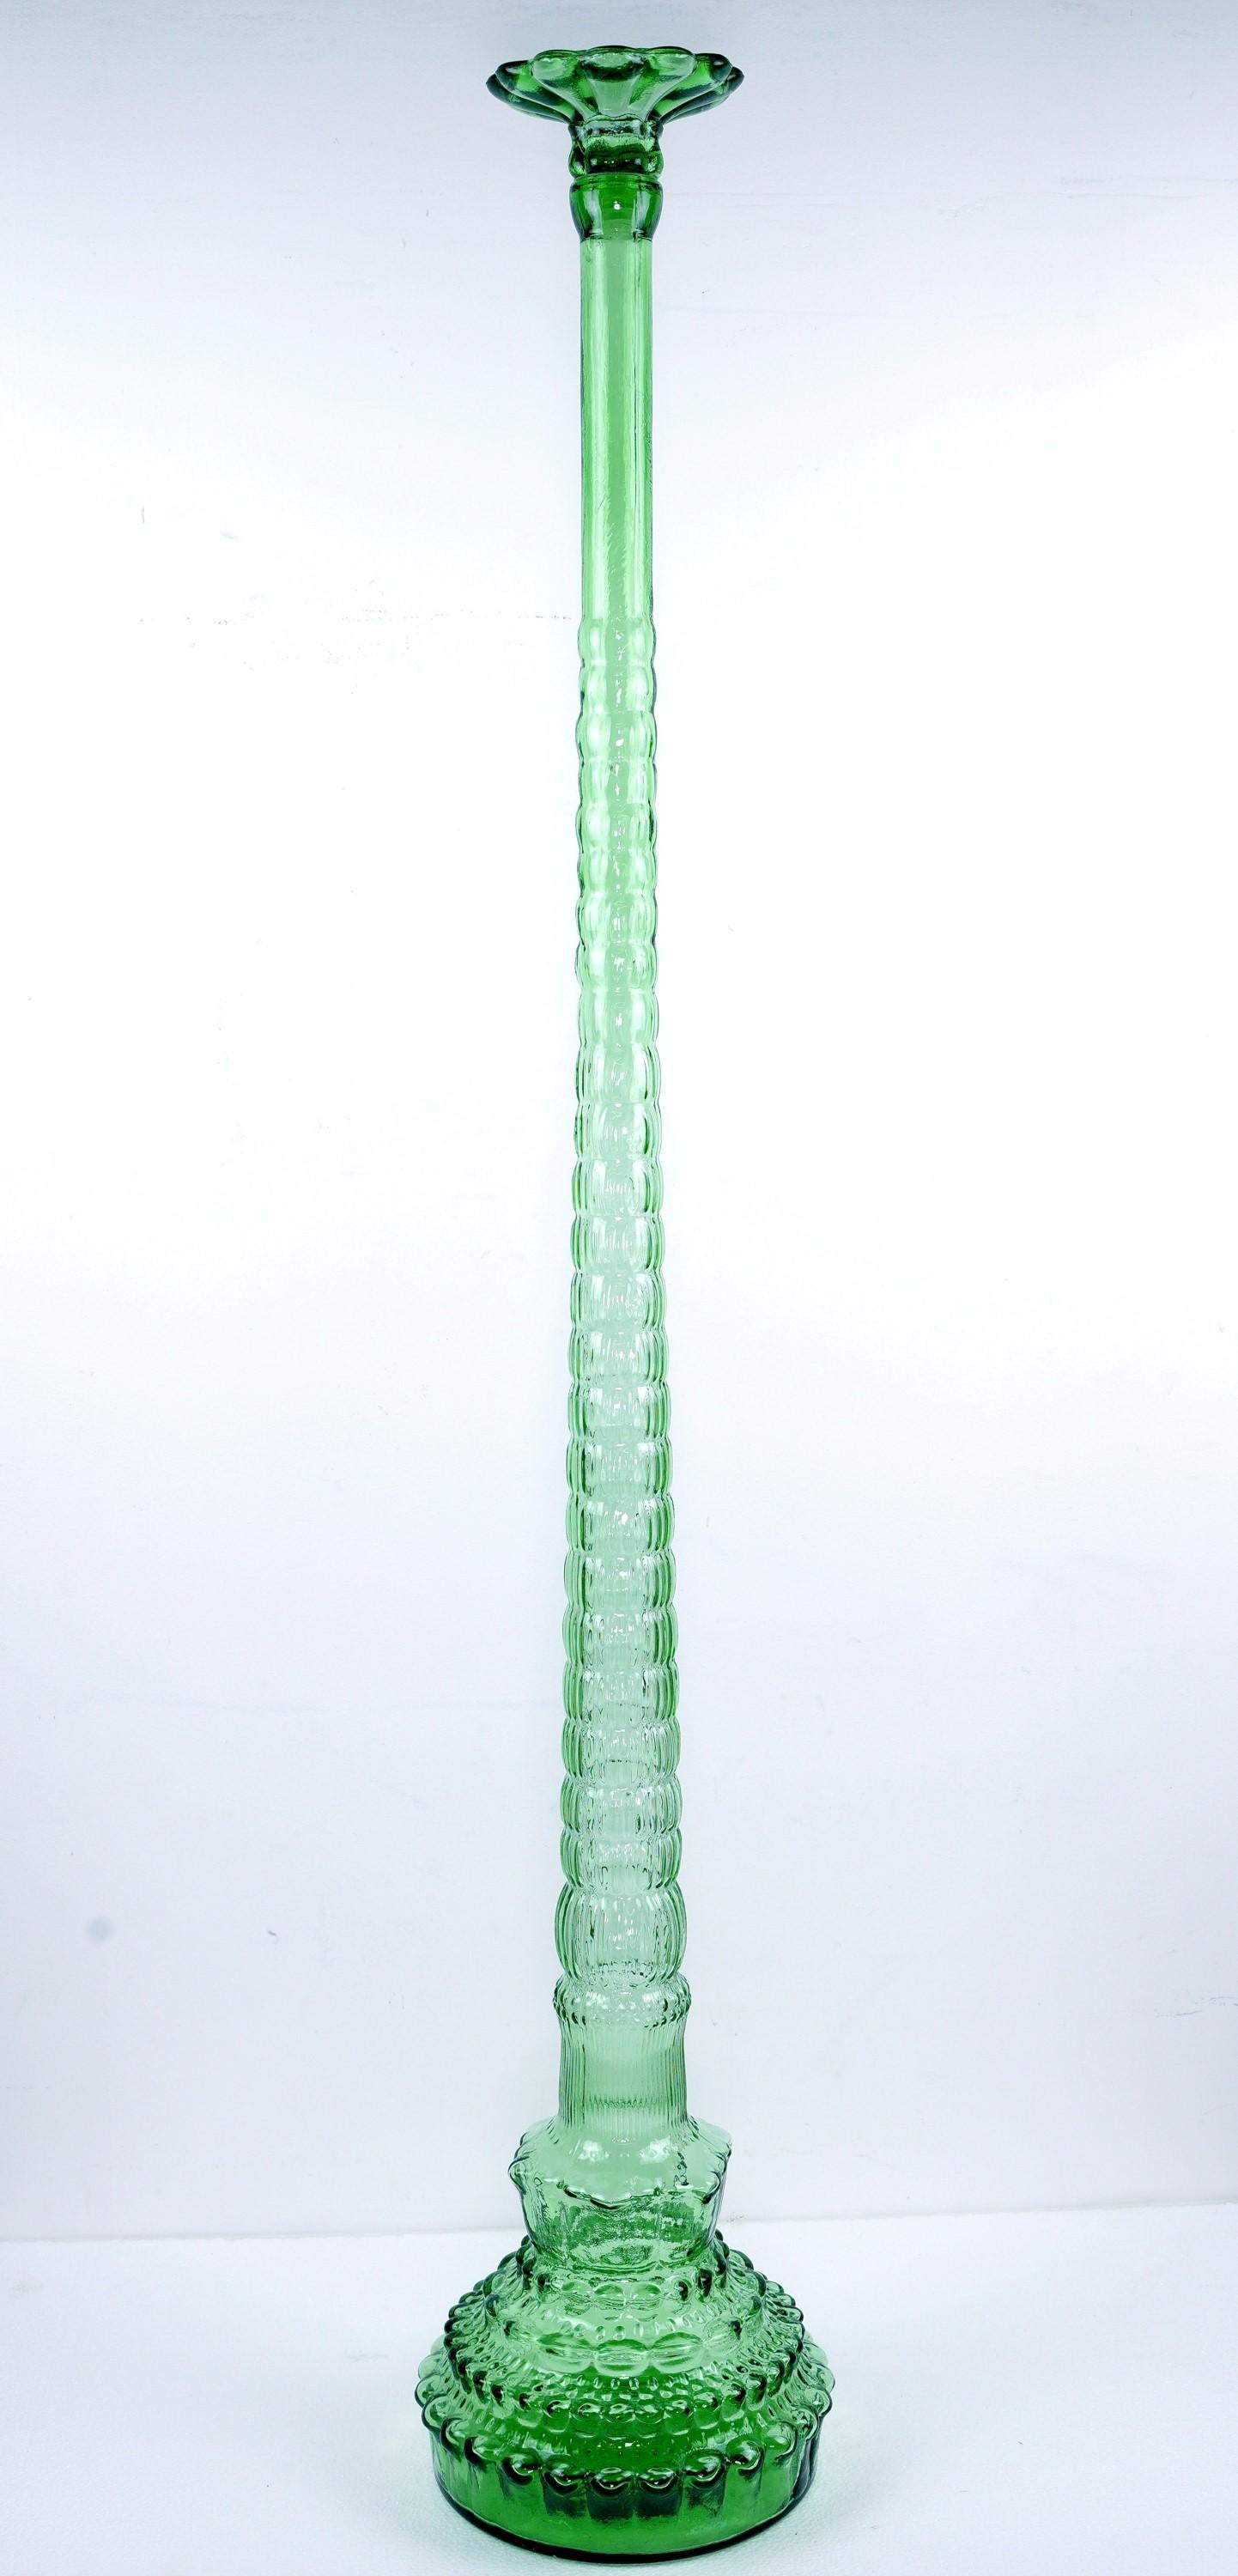 20th century Mid-Century Modern emerald colored green art glass bottle or vase done in a raised bubble pattern. Please note, this item is located in our Scranton, PA location.